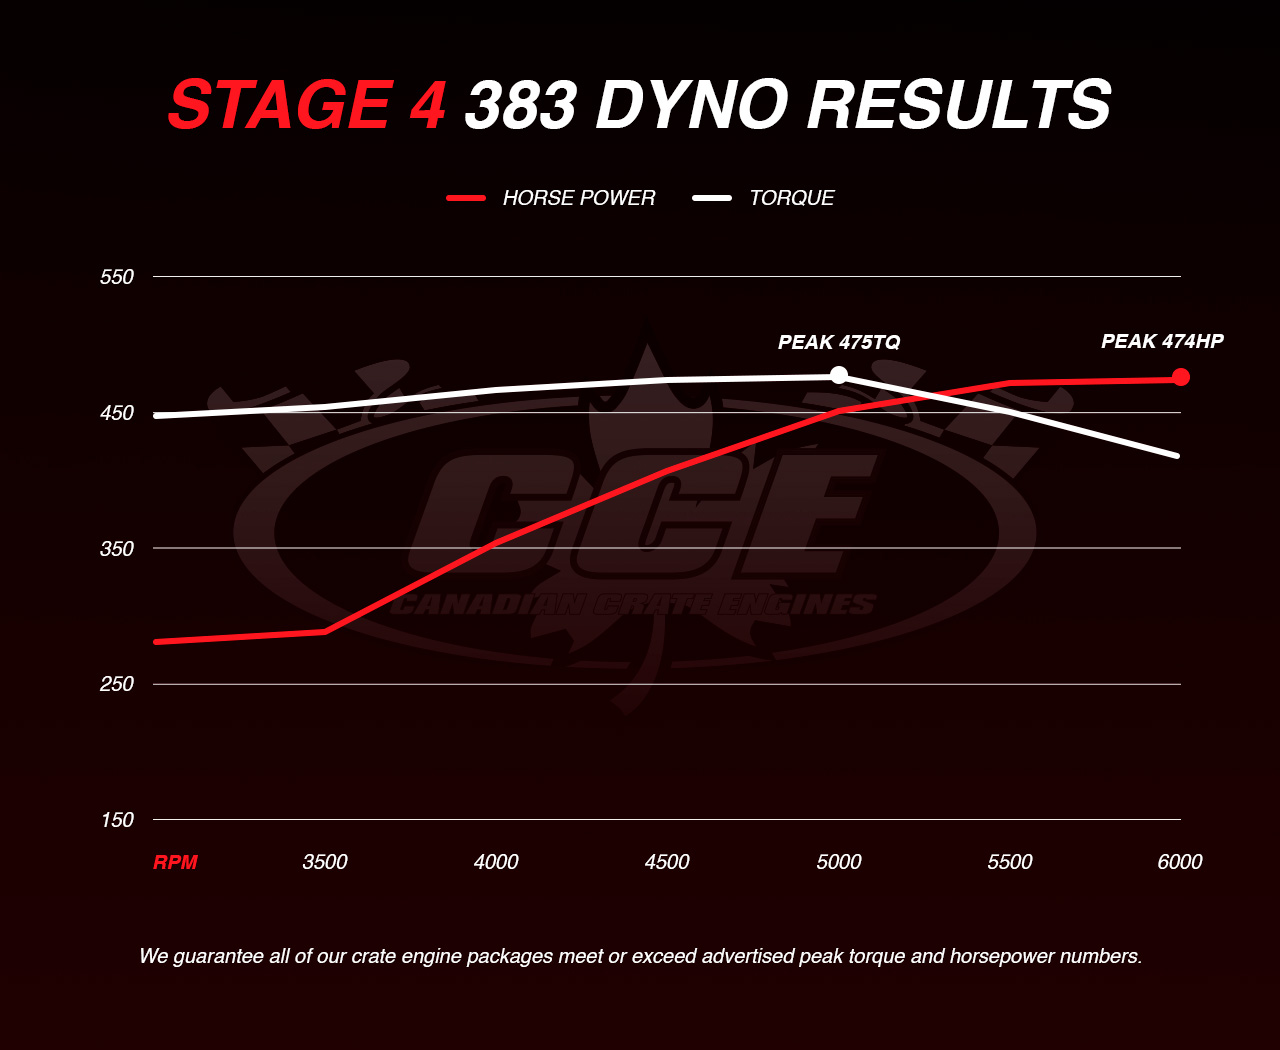 Dyno Graph Results for Chevy Stage 4 showing peak torque of 475TQ and peak horsepower of 474HP